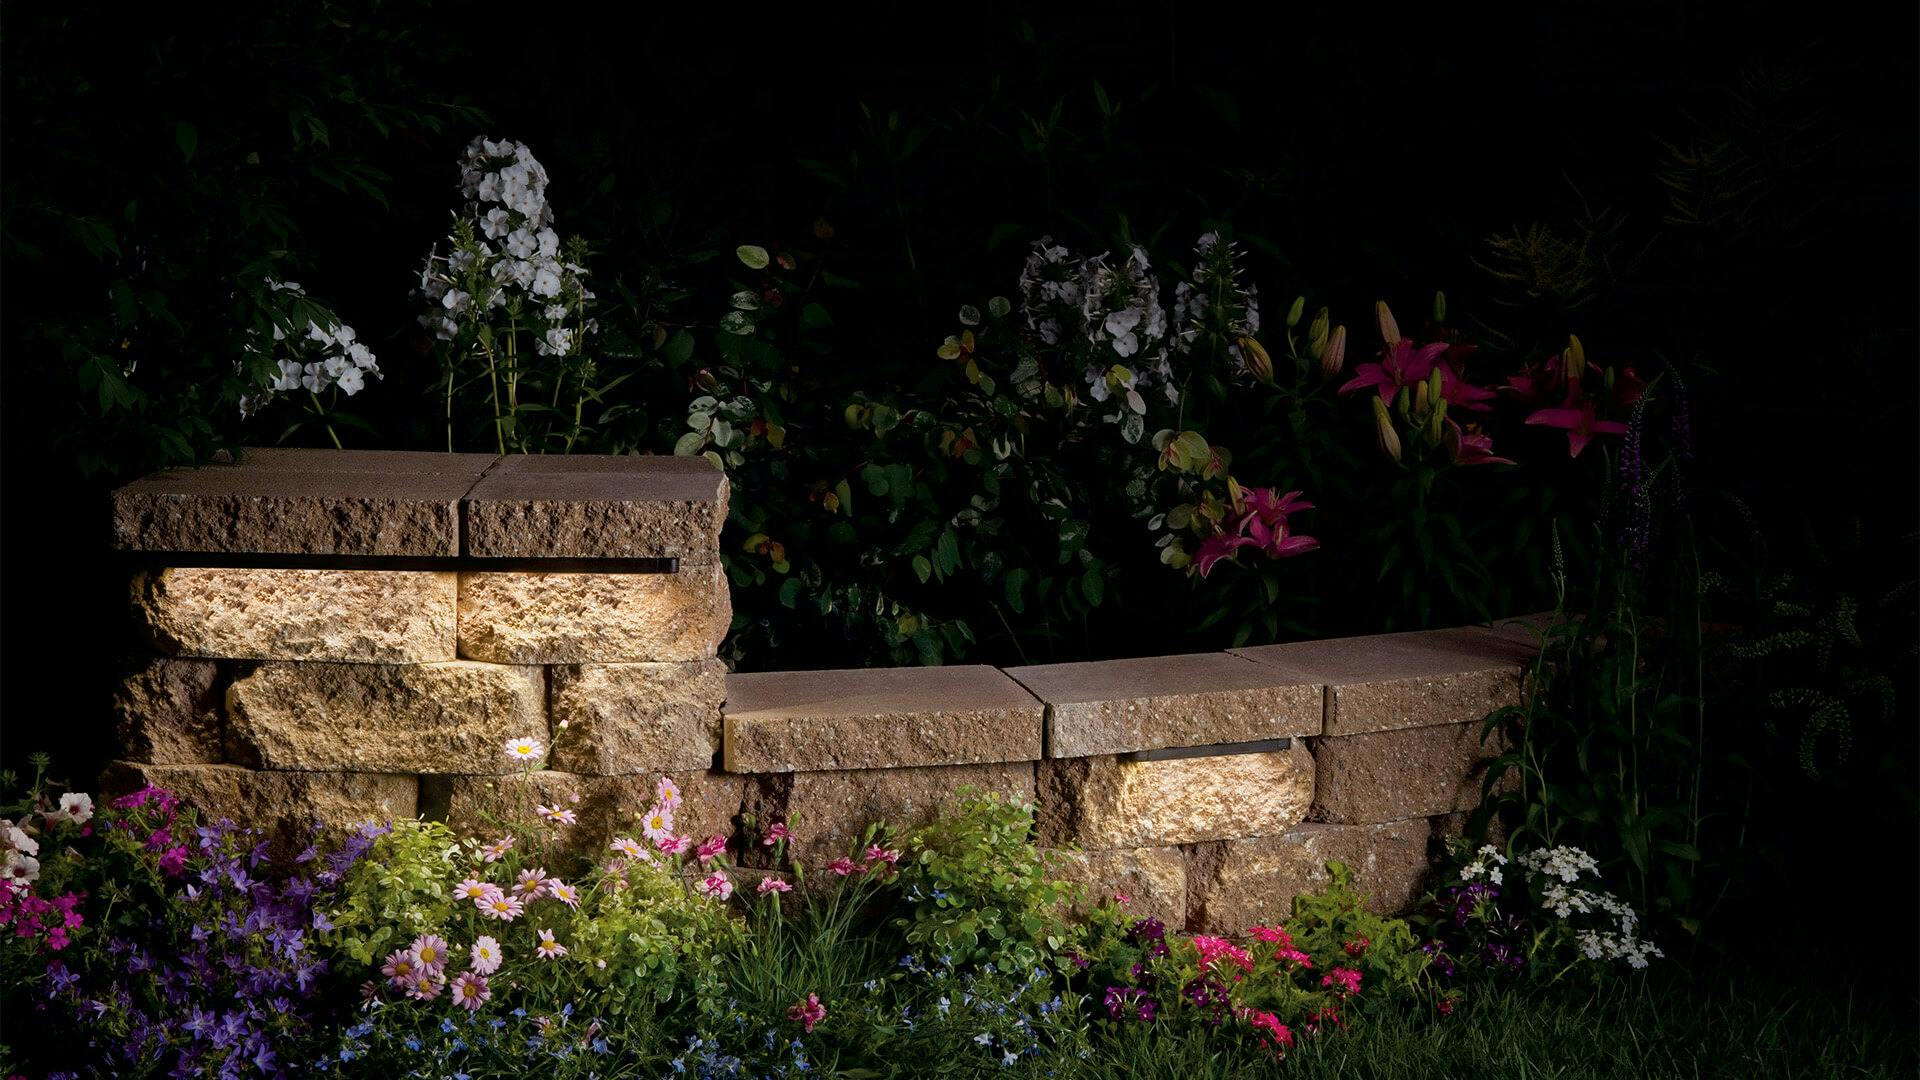 Dark landscape at night, close up of a lit stone garden bed